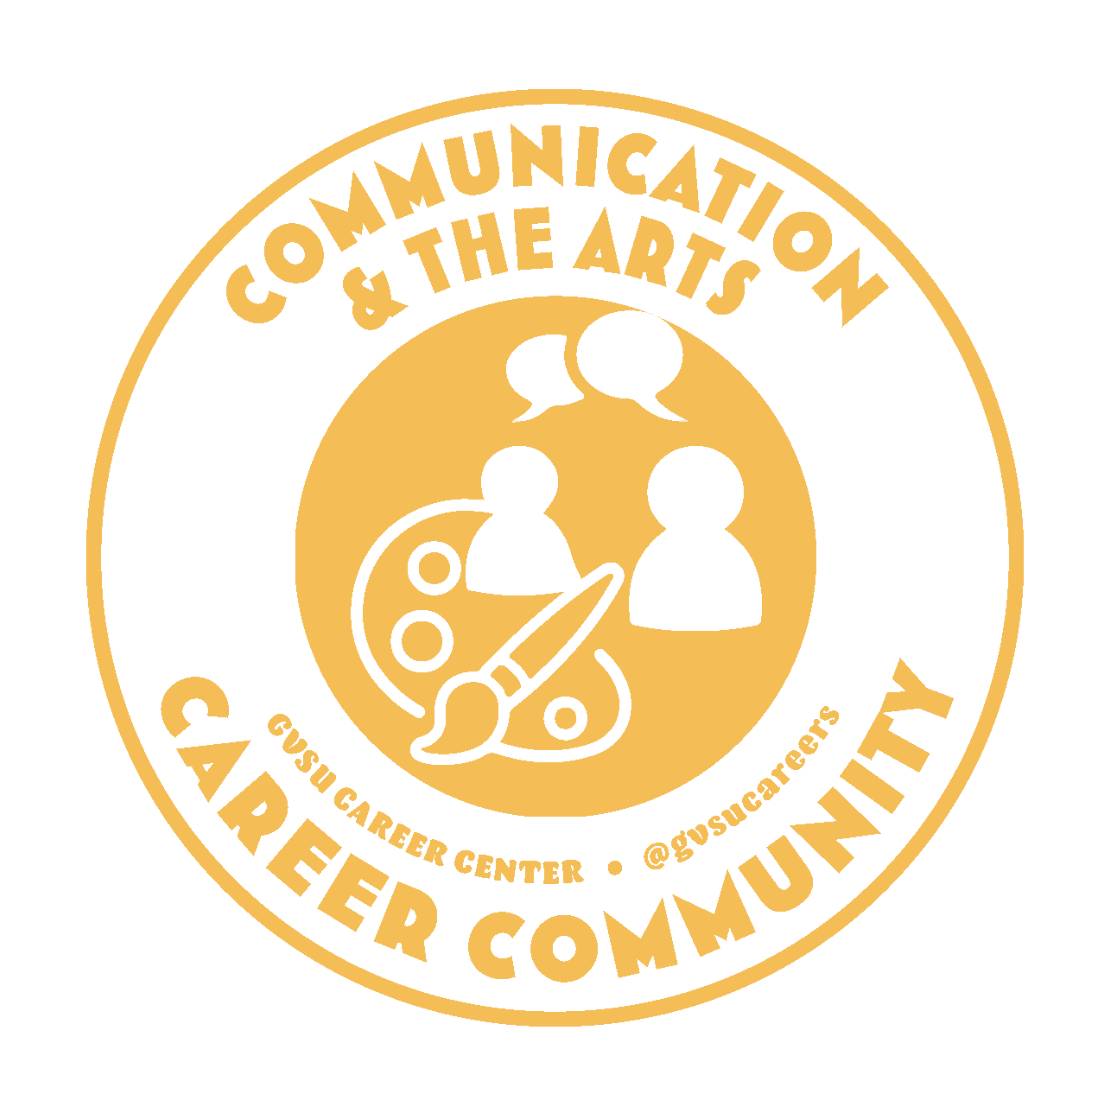 communication and the arts career community